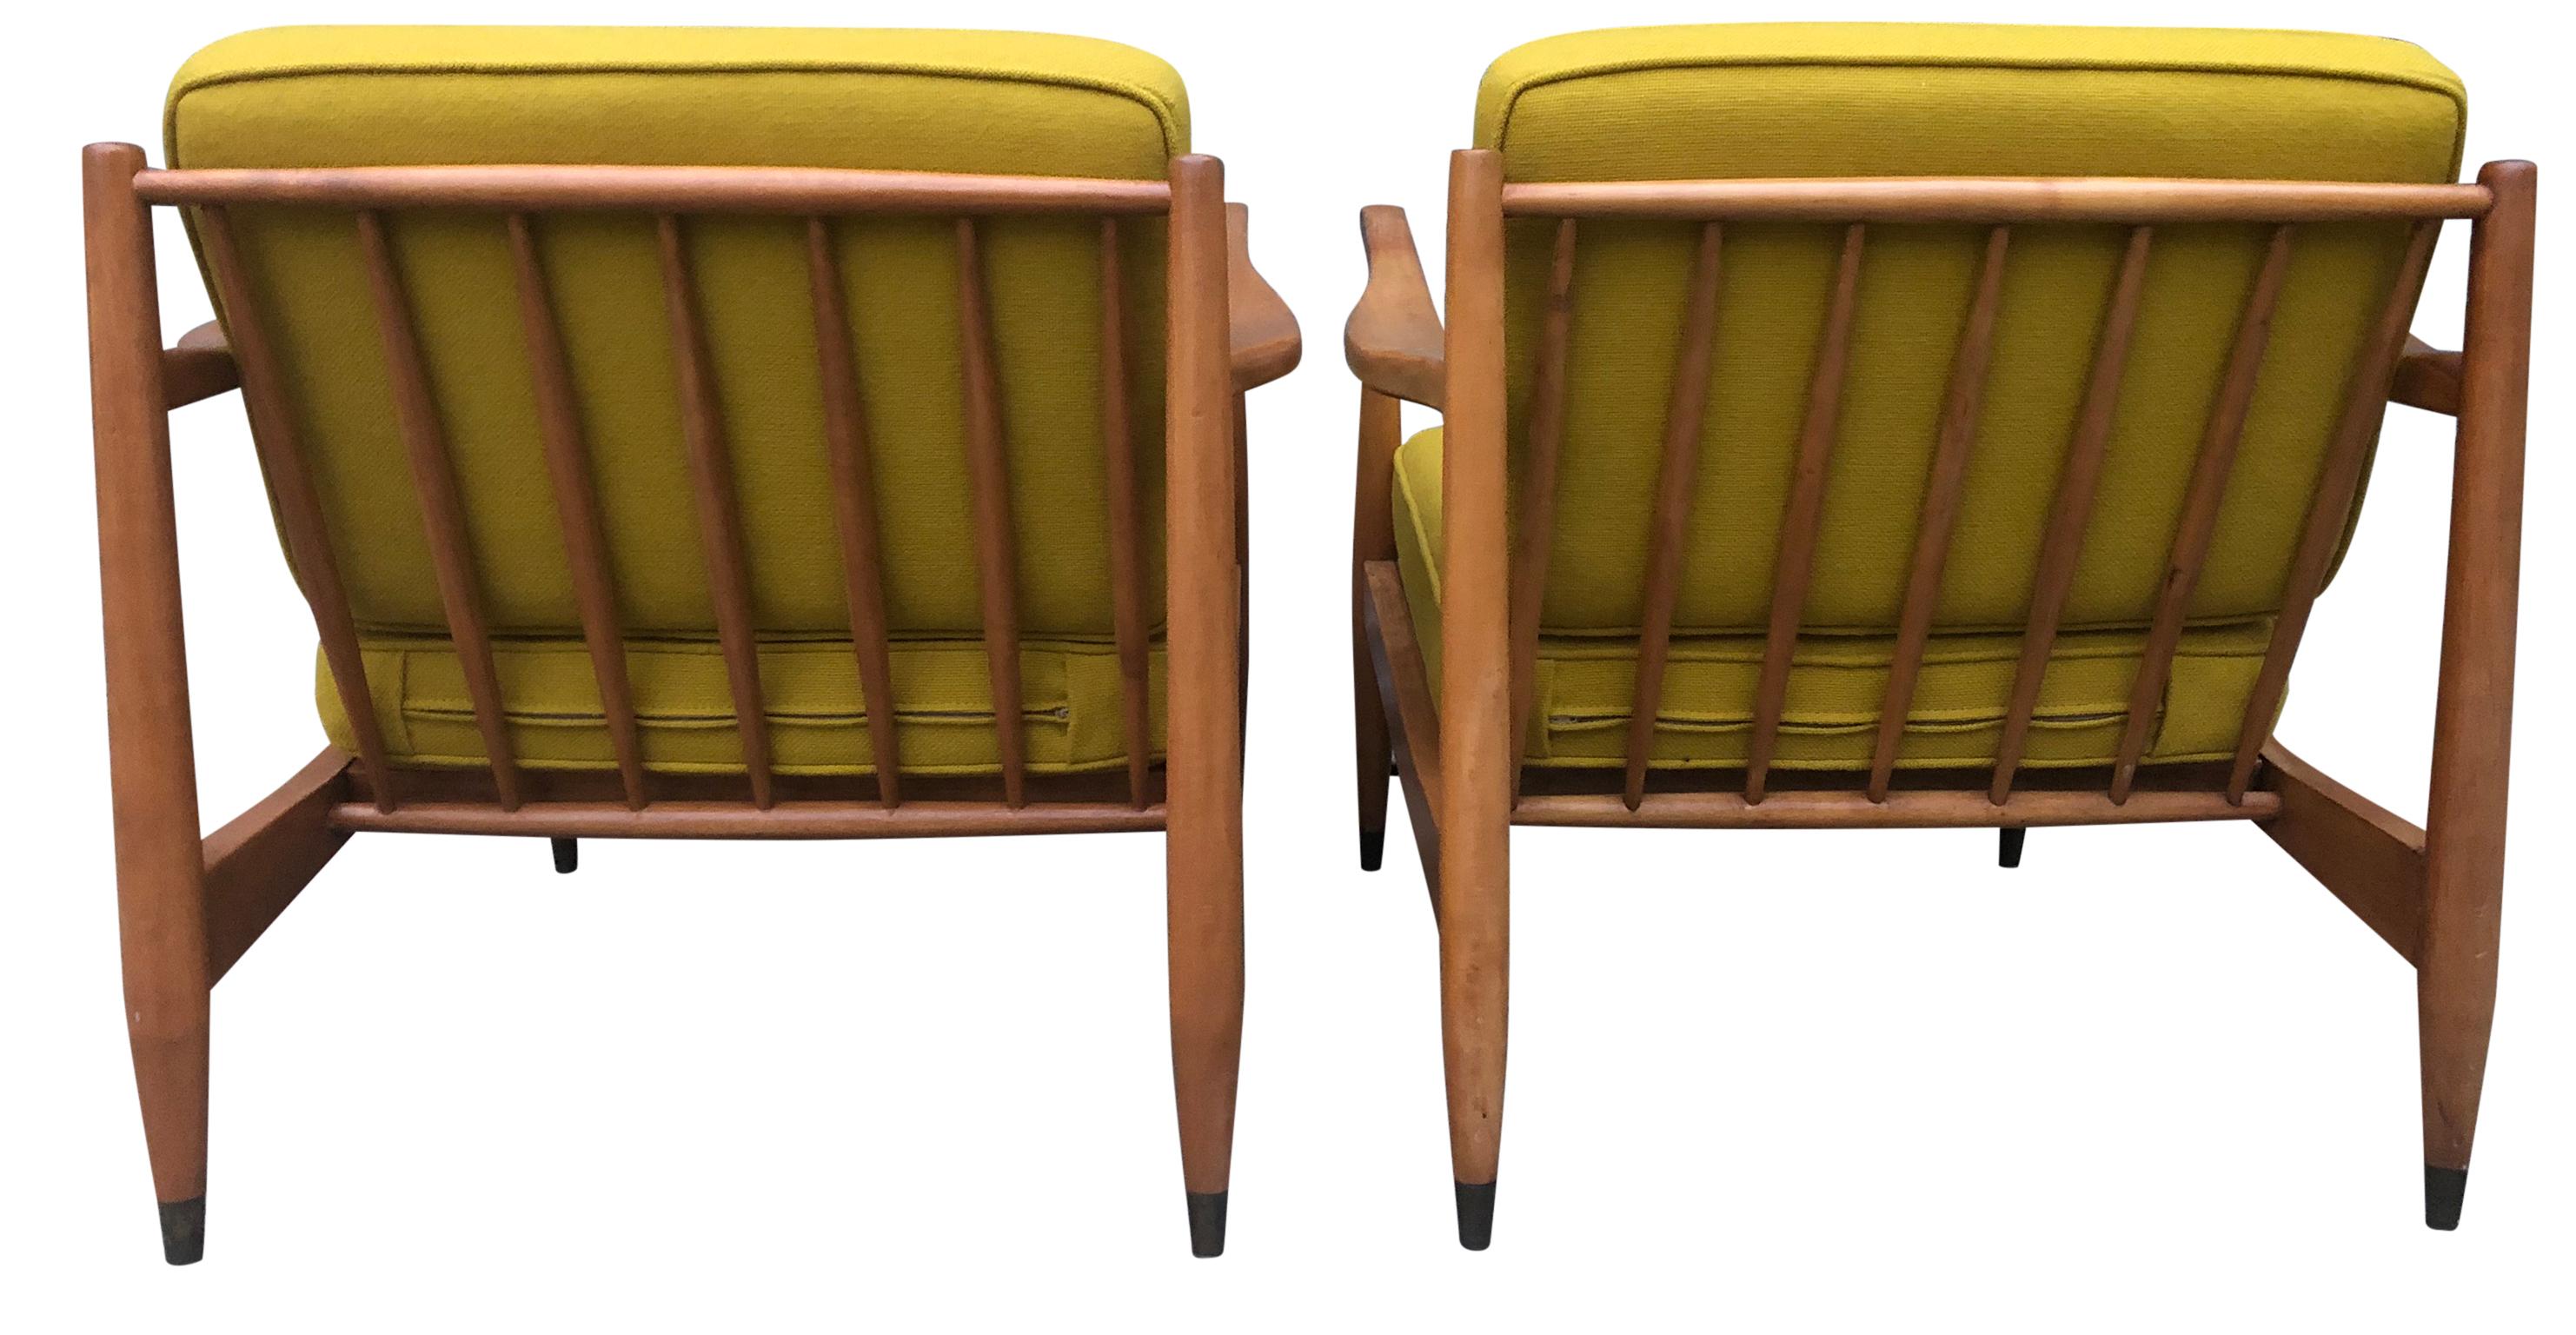 Pair of Midcentury Folke Ohlsson Blonde Lounge Chairs Gold 1